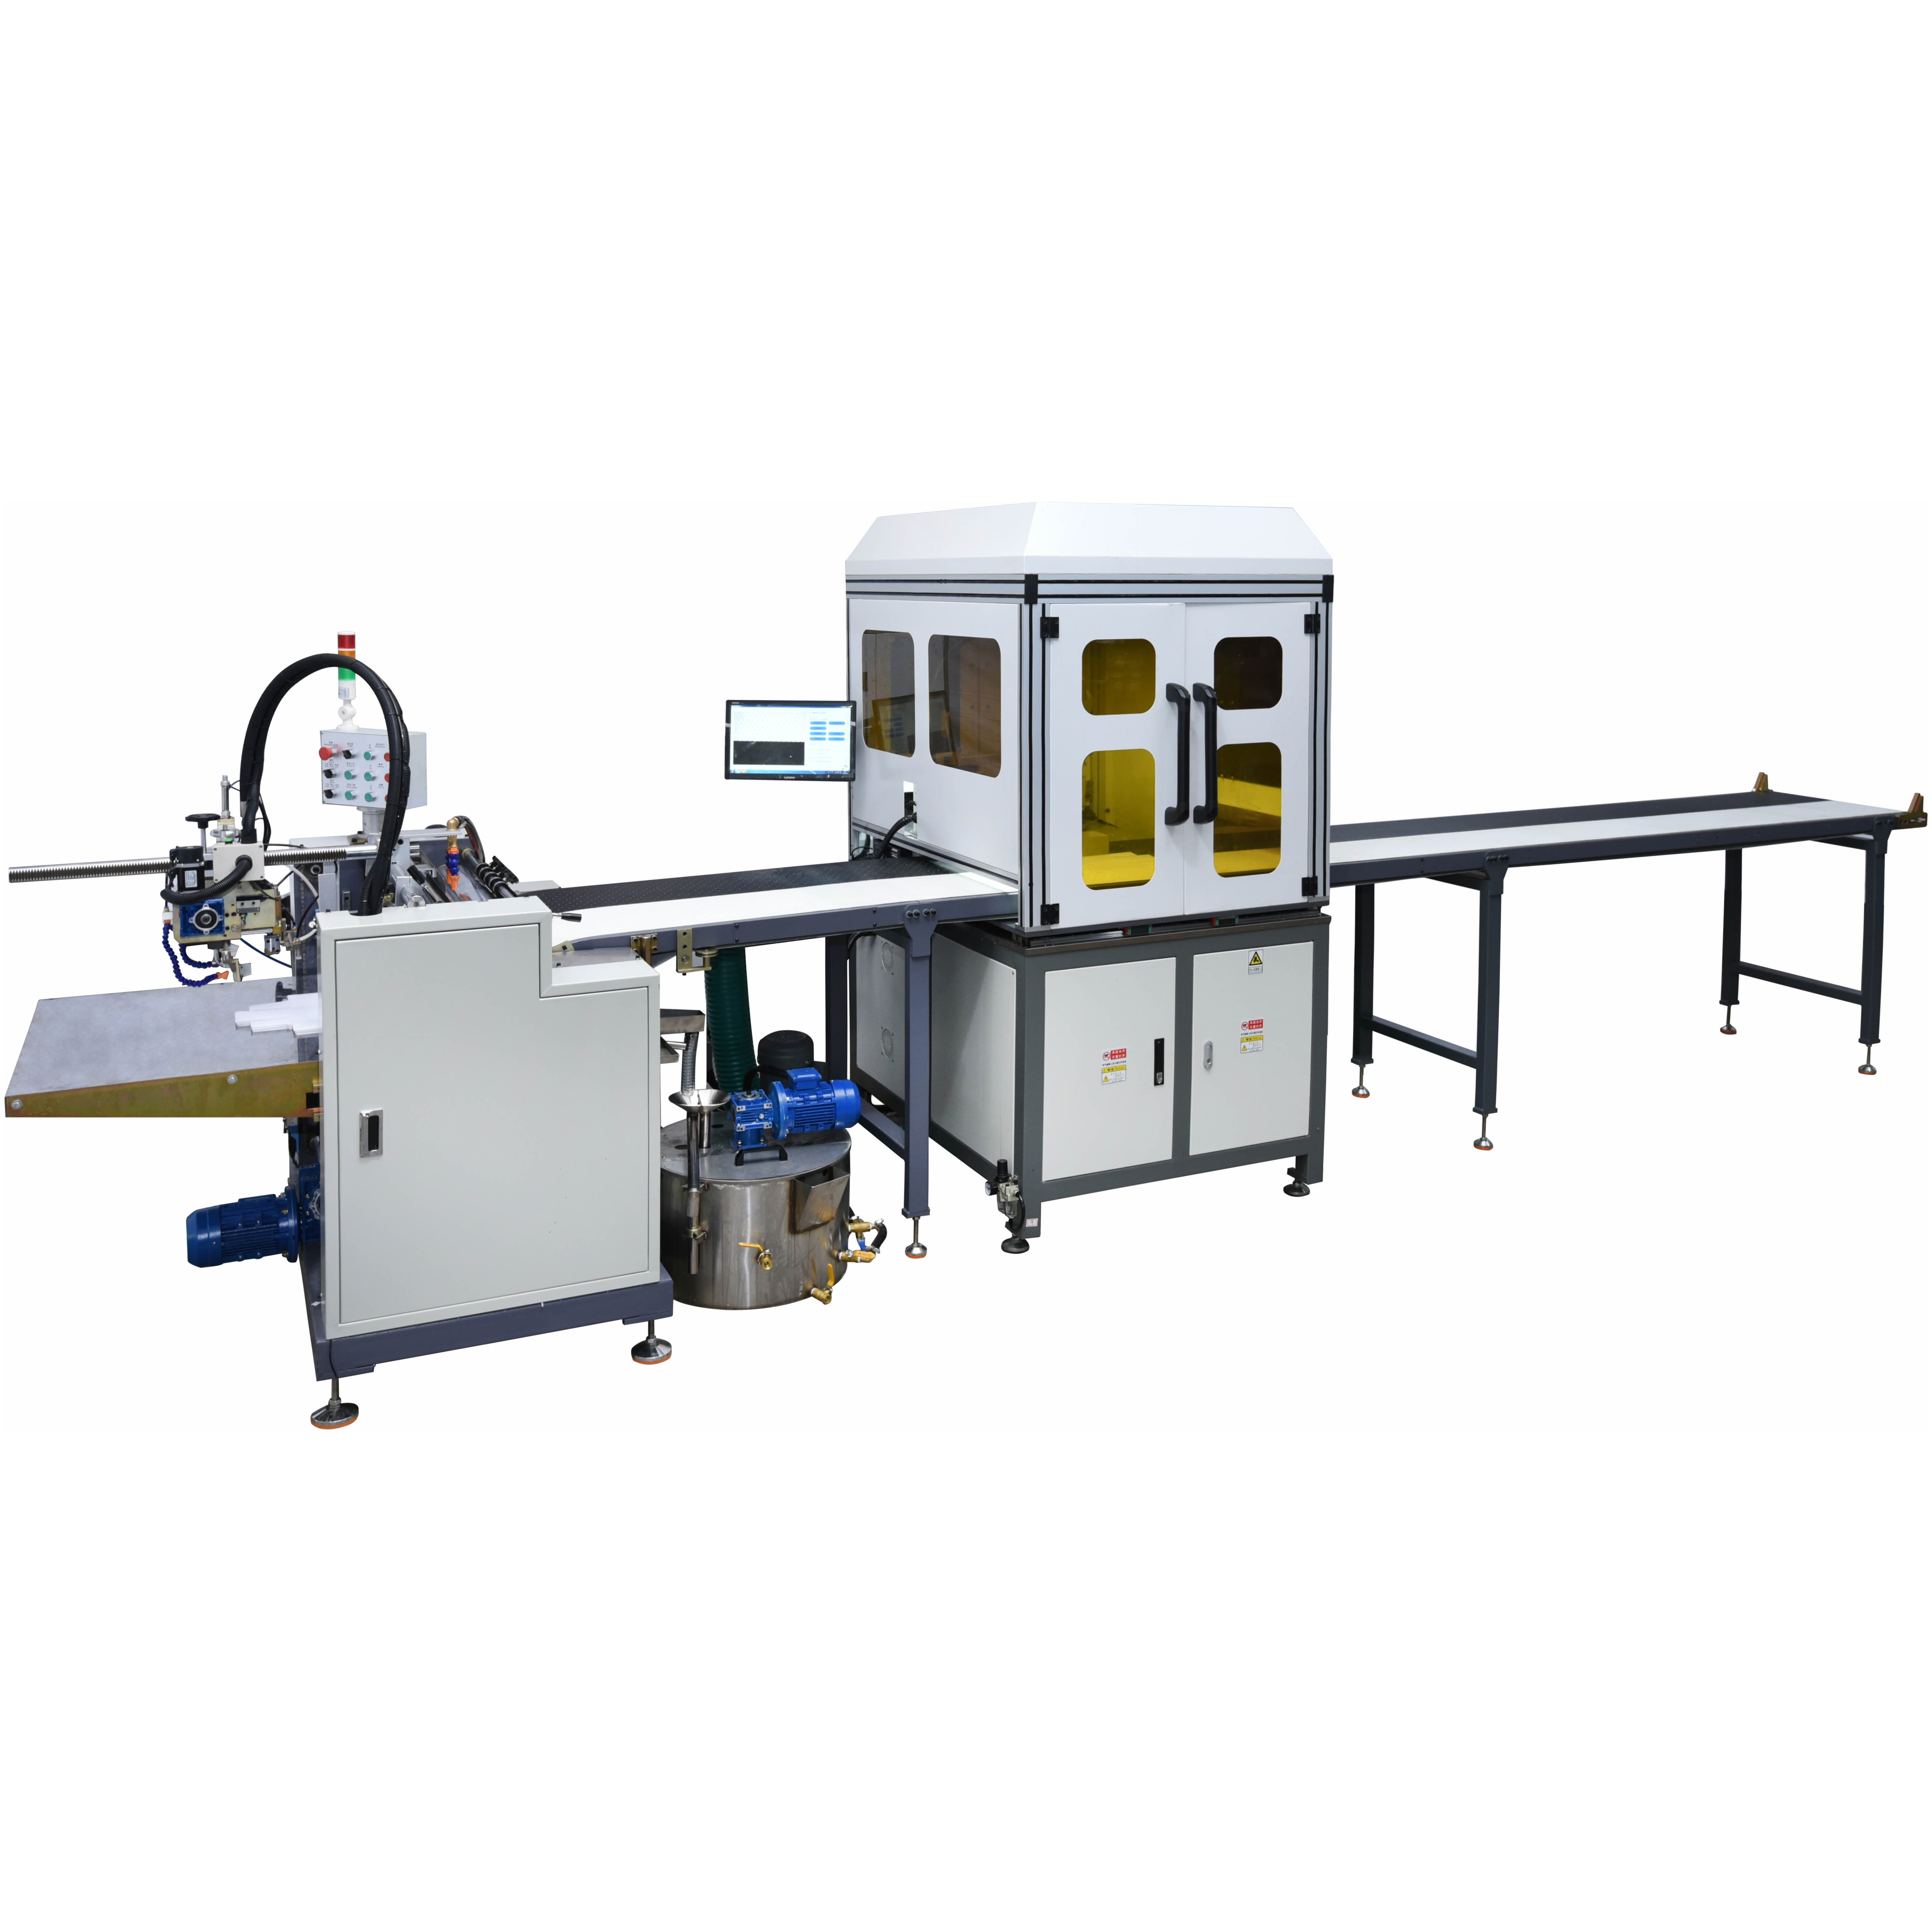 fully automatic positioning machine with manipulator